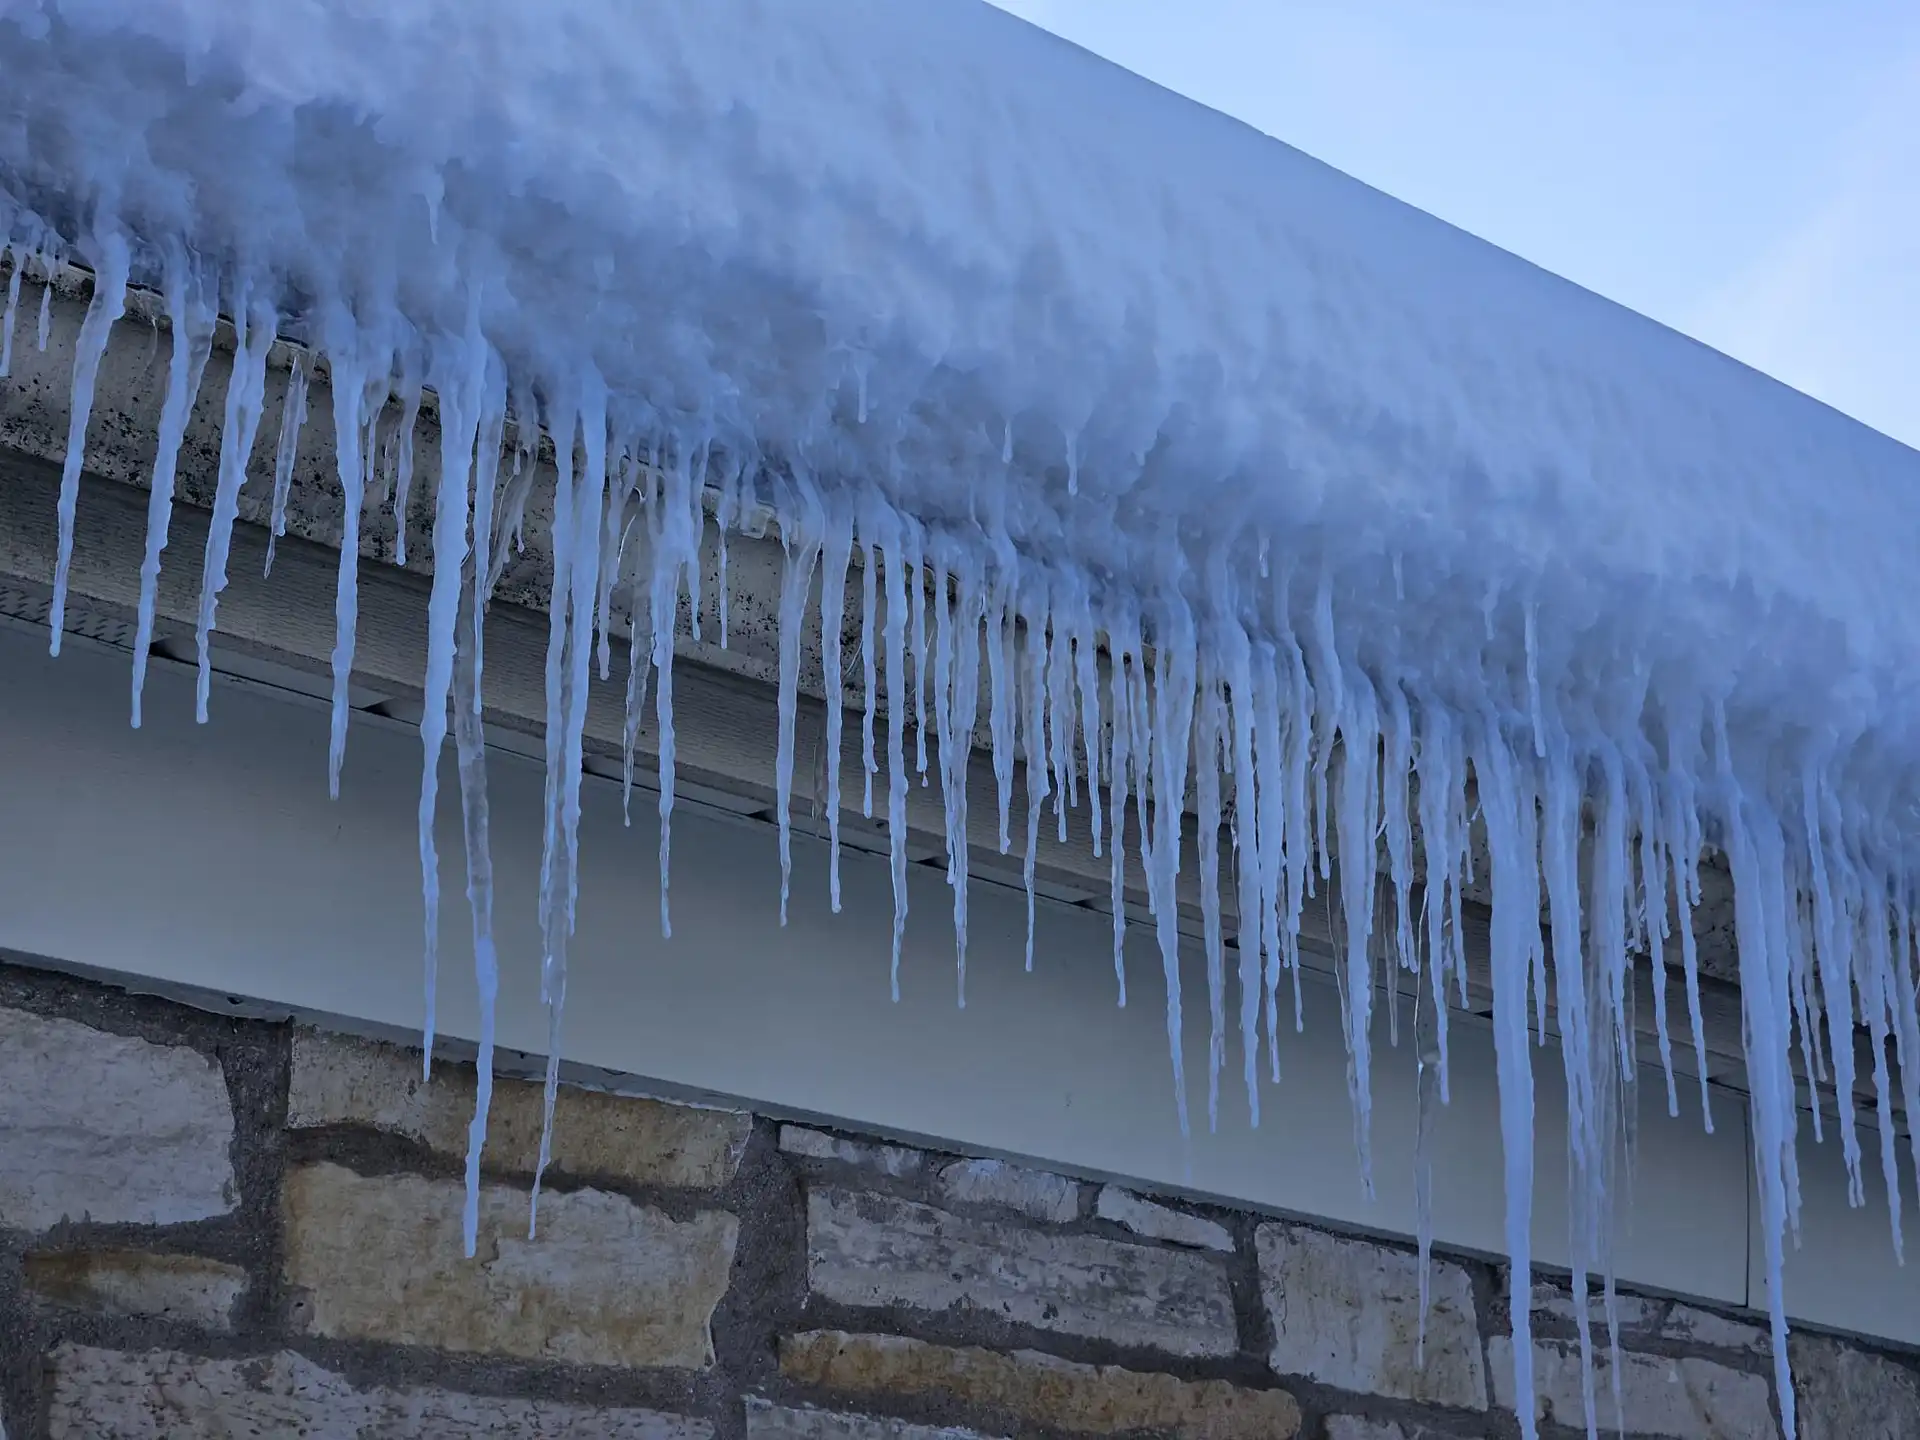 A roof covered in snow with numerous long icicles hanging from the eaves above a stone wall, indicating cold winter conditions.